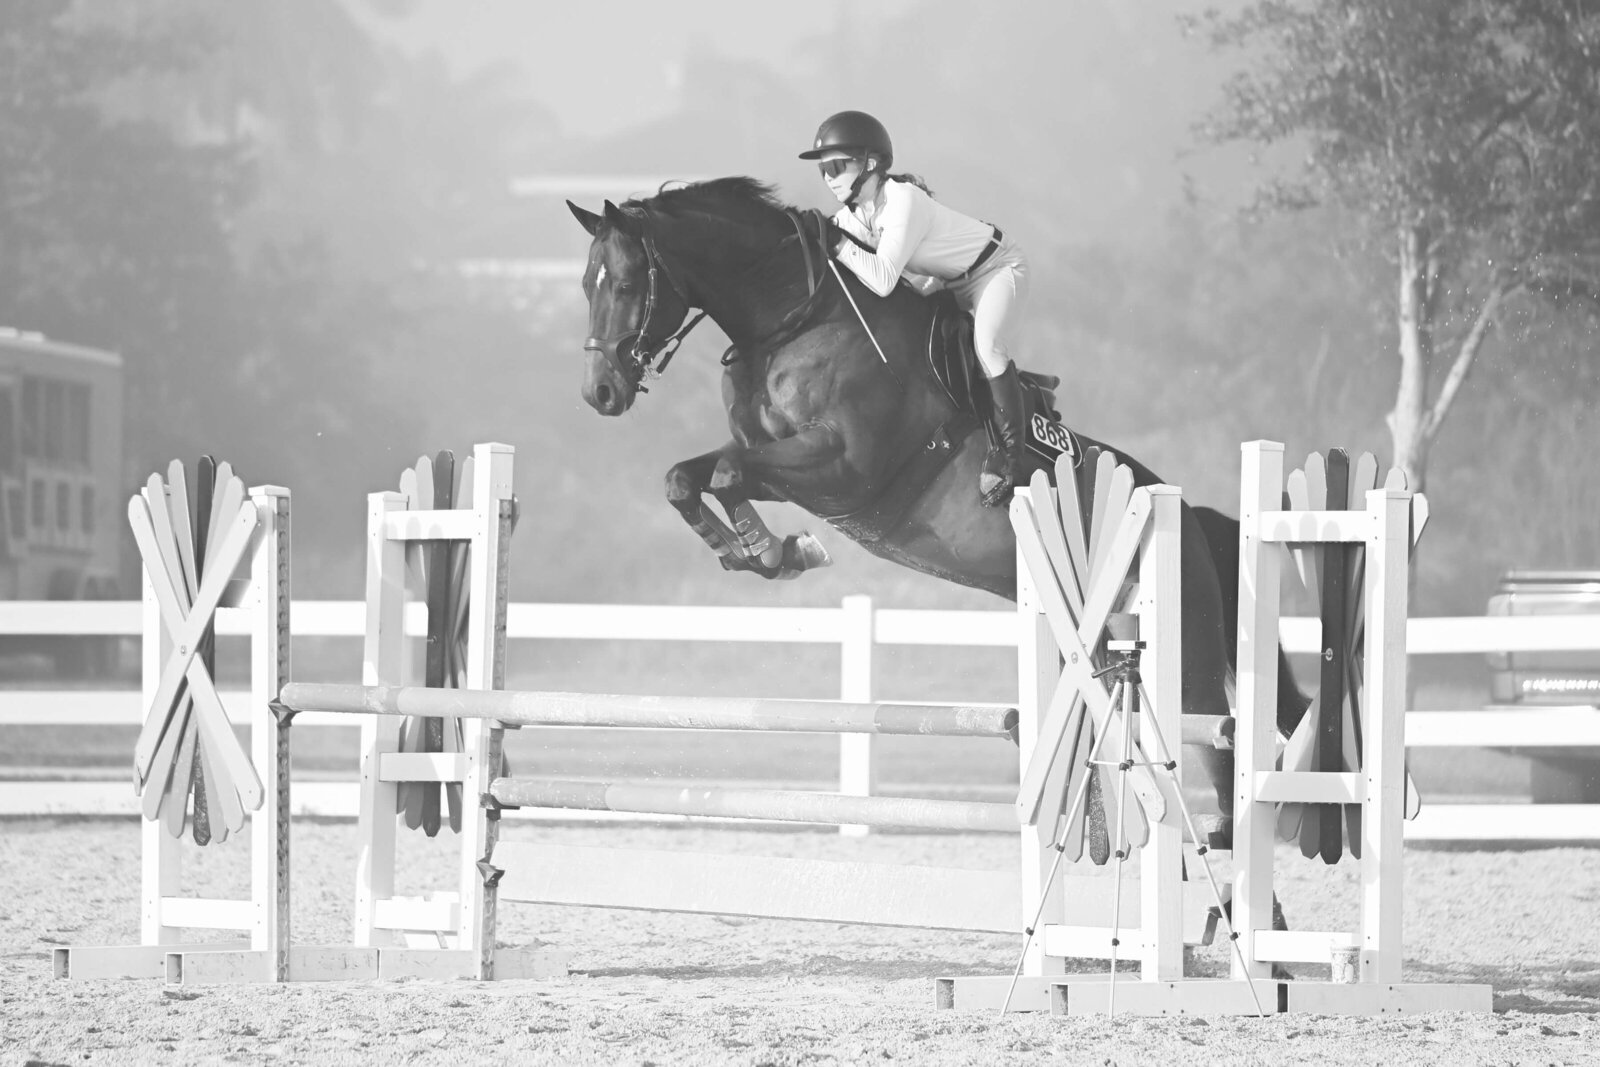 heritage horse show photography of a rider jumping over a fence with the fog closing in around them in black and white